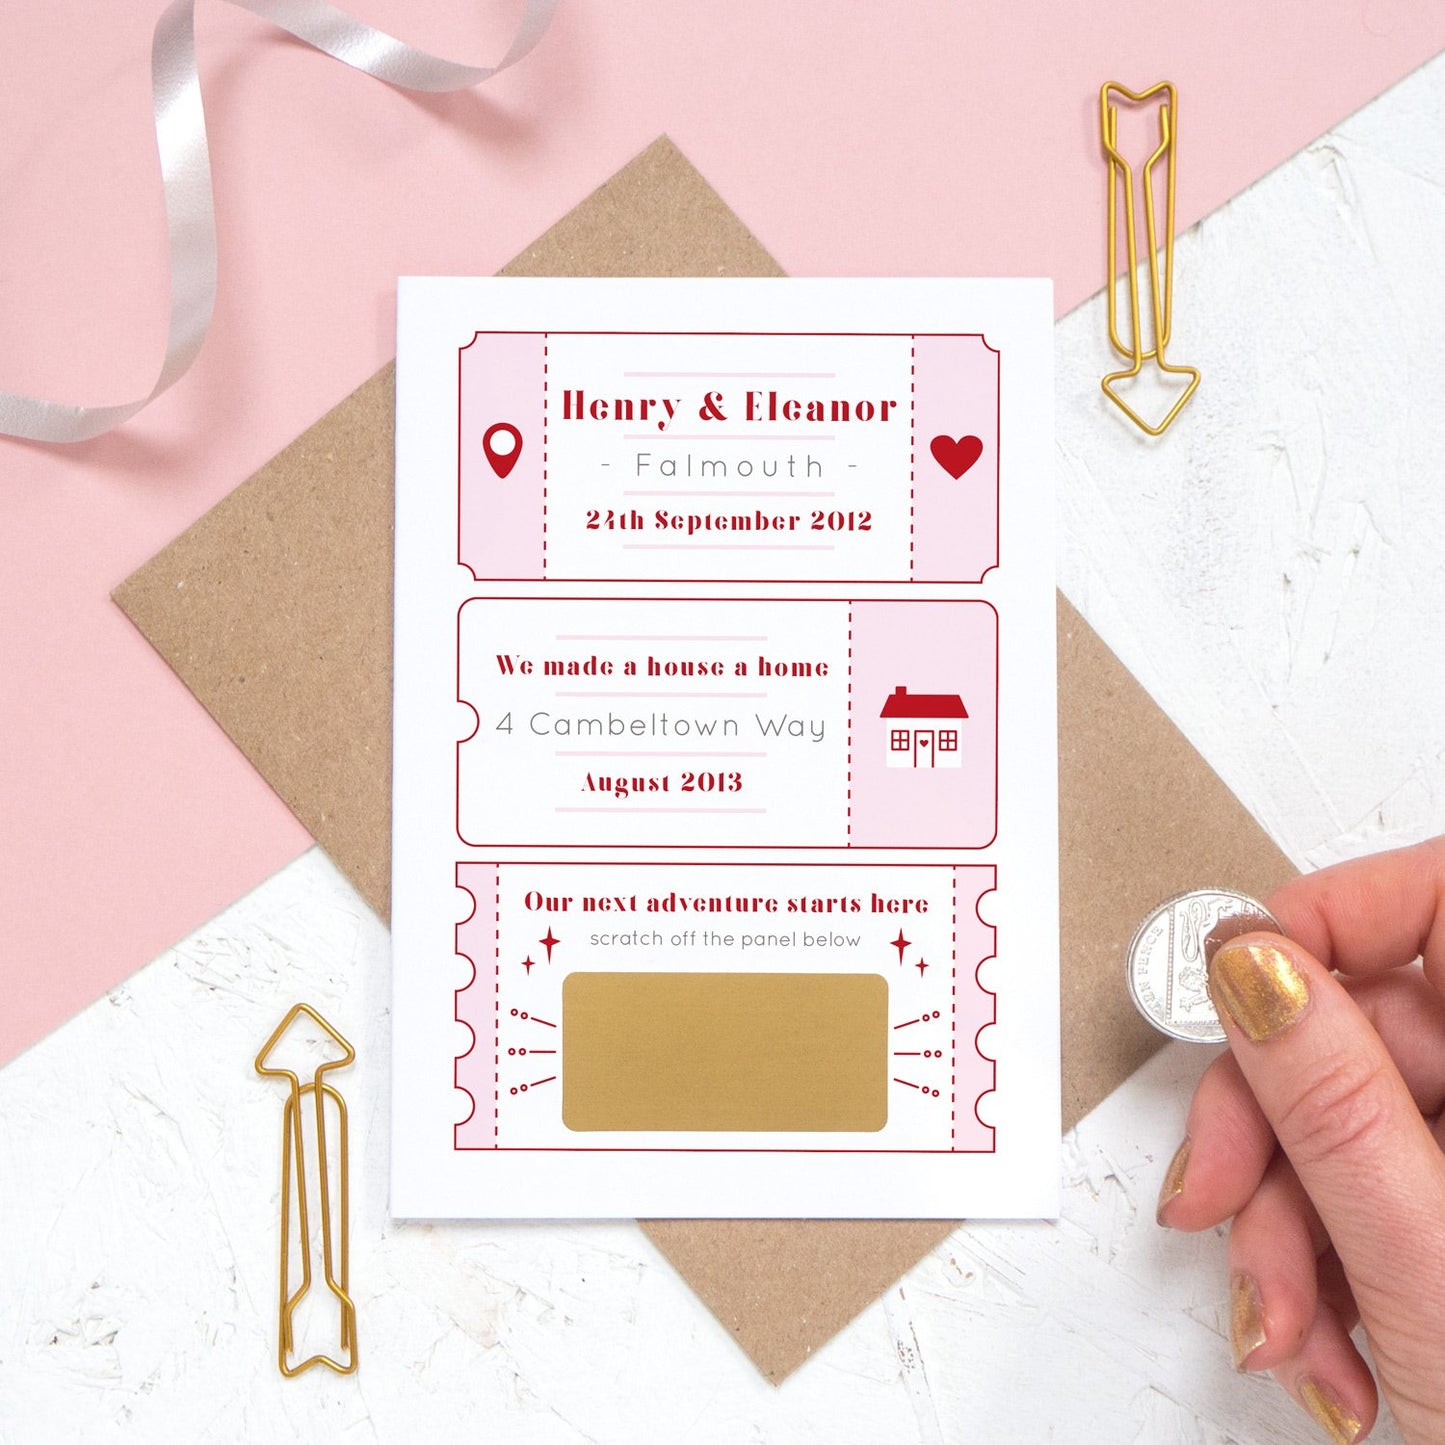 A personalised will you marry me scratch card where the question is hidden under a golden panel ready to be revealed. The card details special moments such as when you first met and where you first lived together.